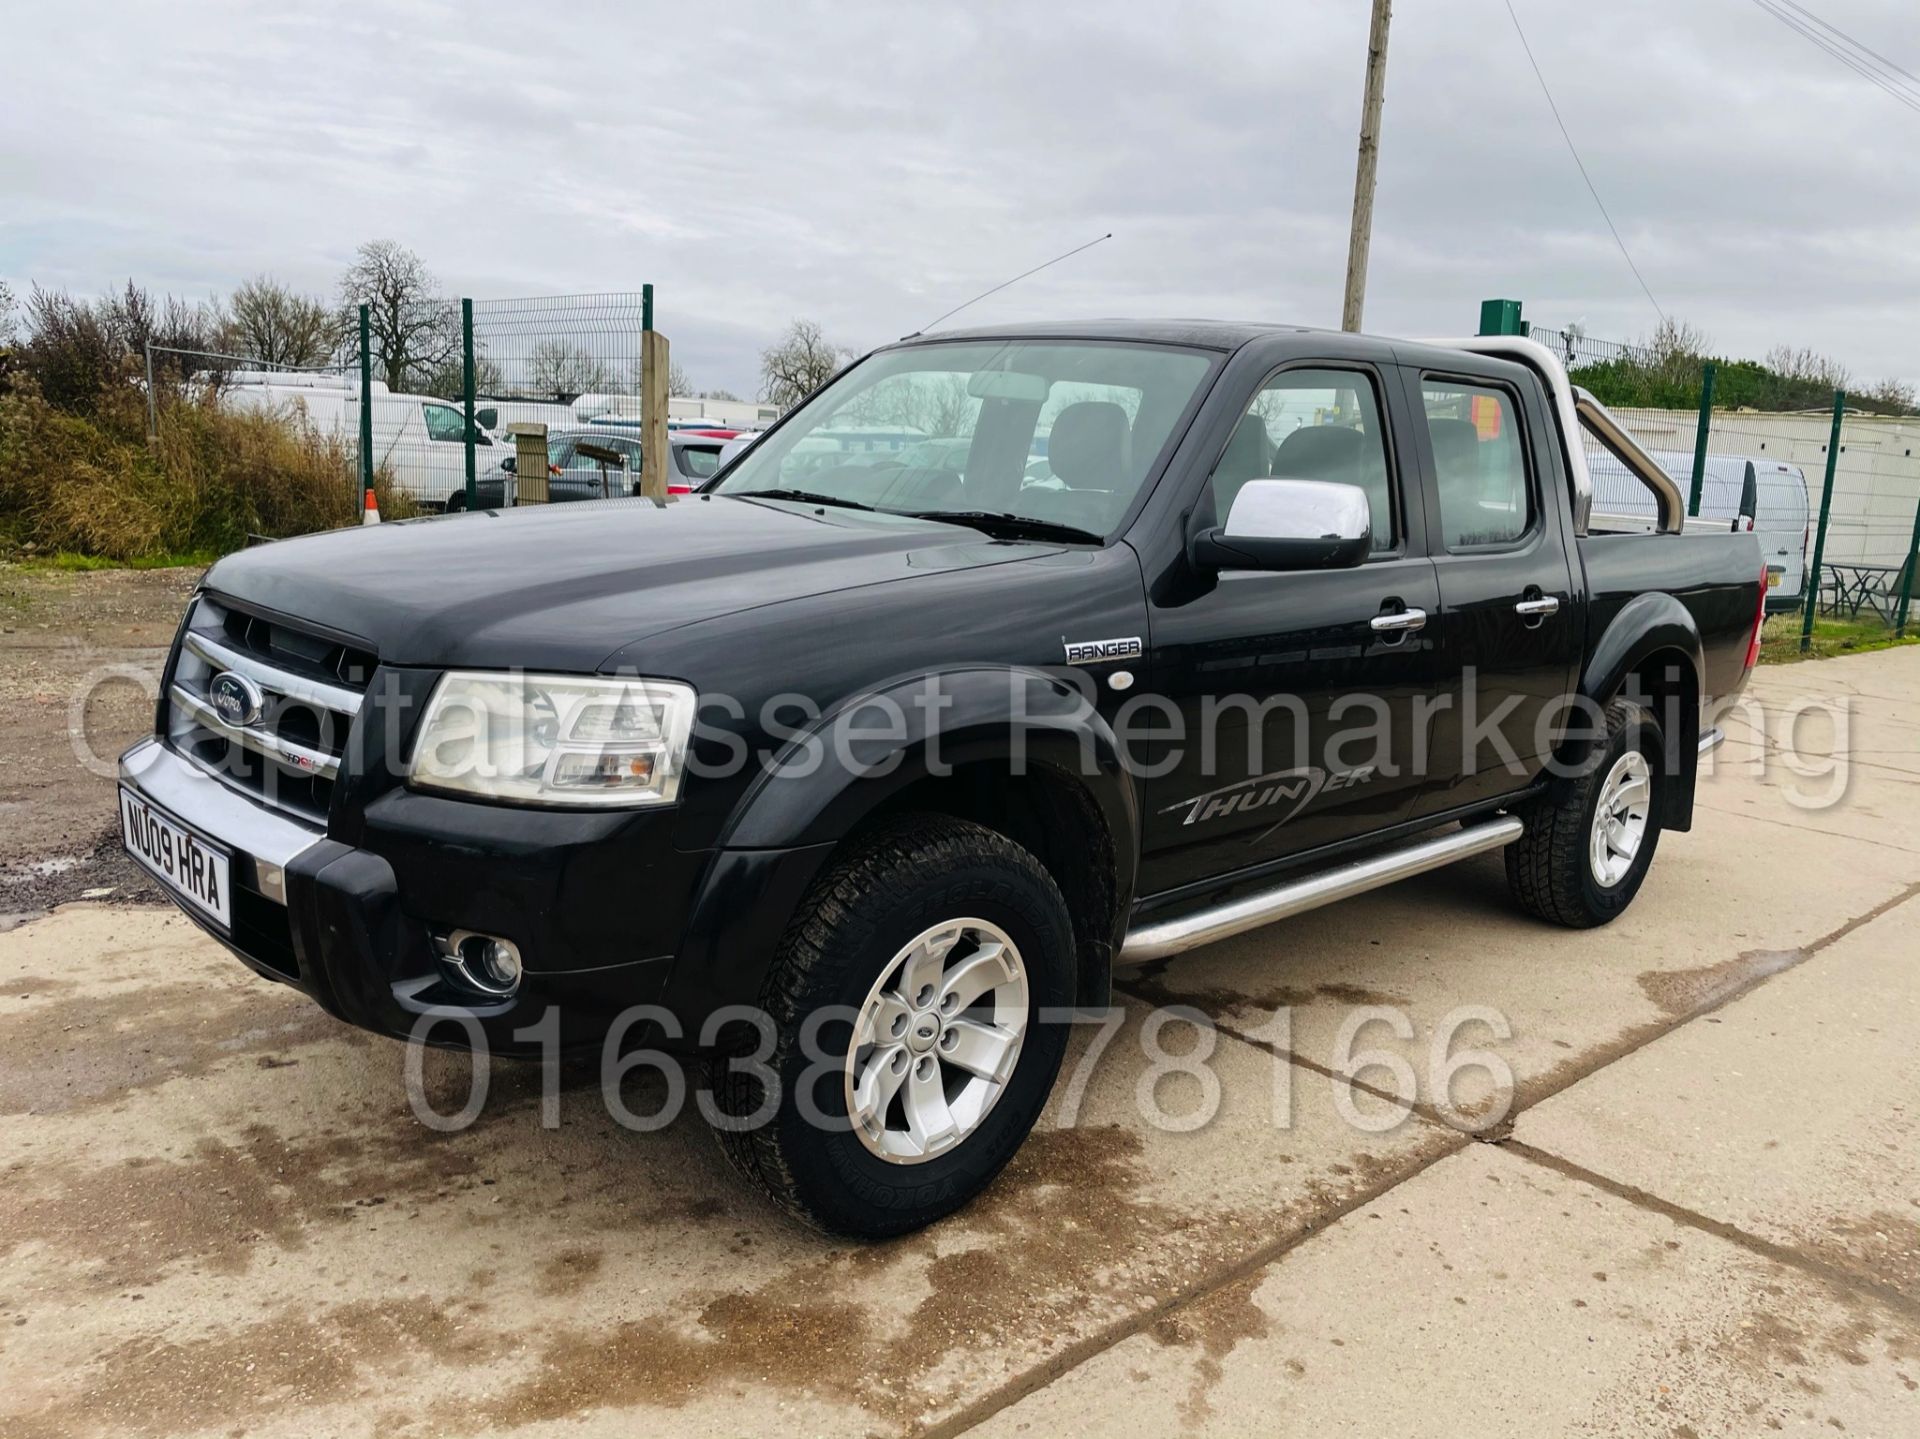 ON SALE FORD RANGER *THUNDER* DOUBLE CAB 4X4 PICK-UP (2009) '2.5 TDCI - 1 *LEATHER - A/C* (NO VAT) - Image 6 of 40